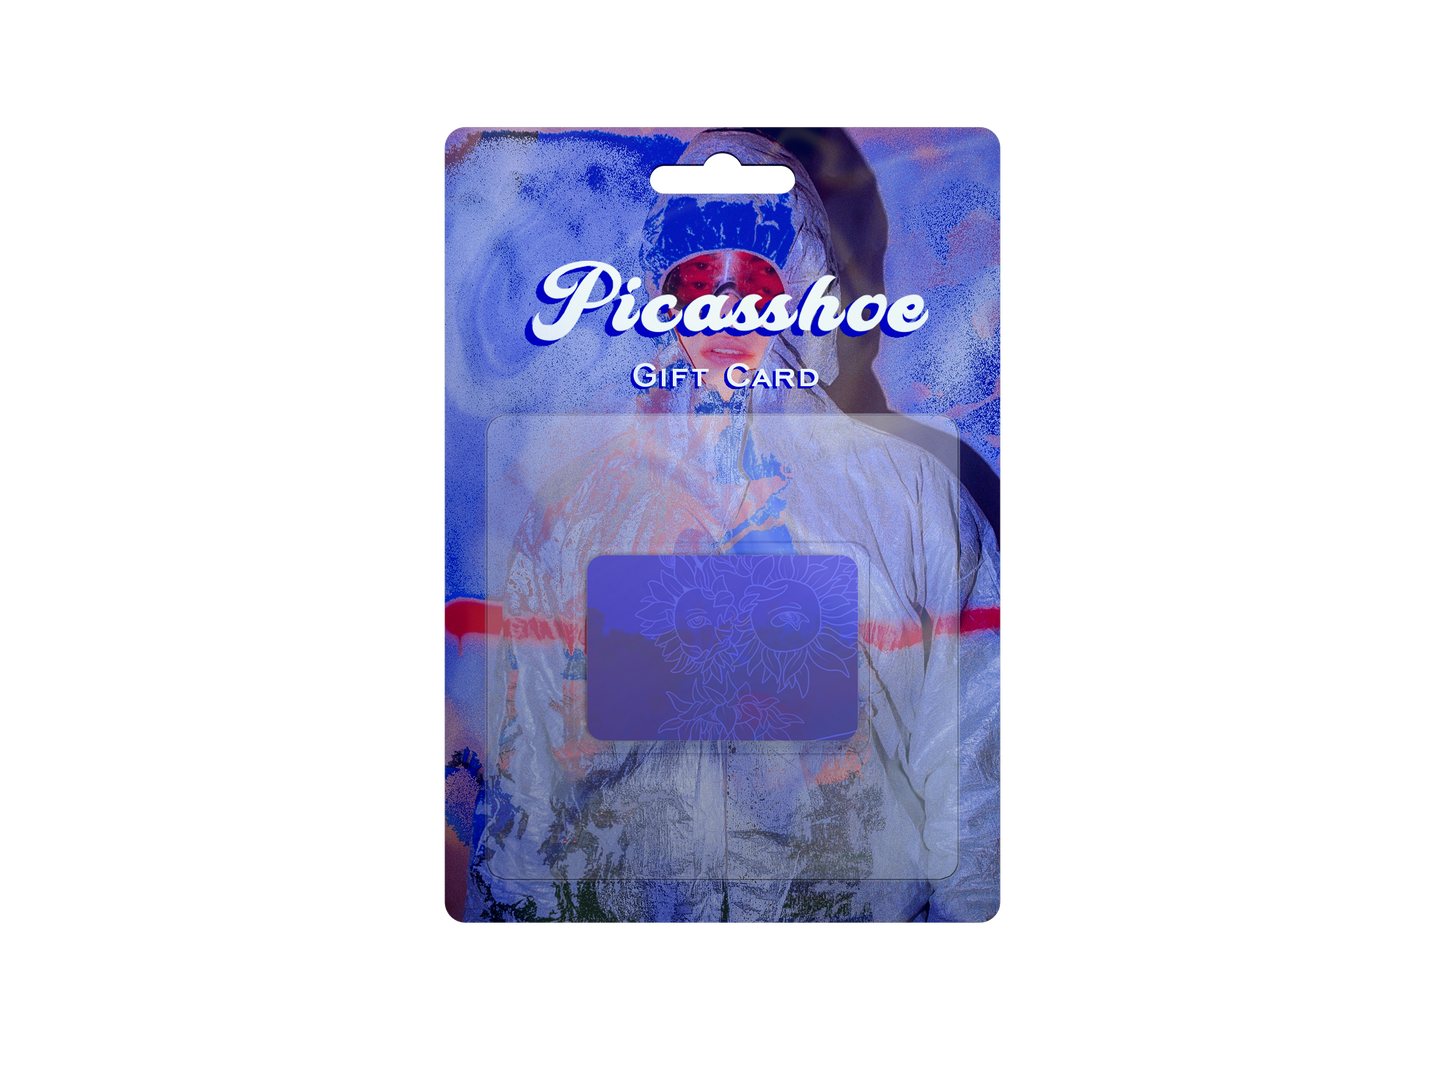 Gift Card - Picasshoe Clothing